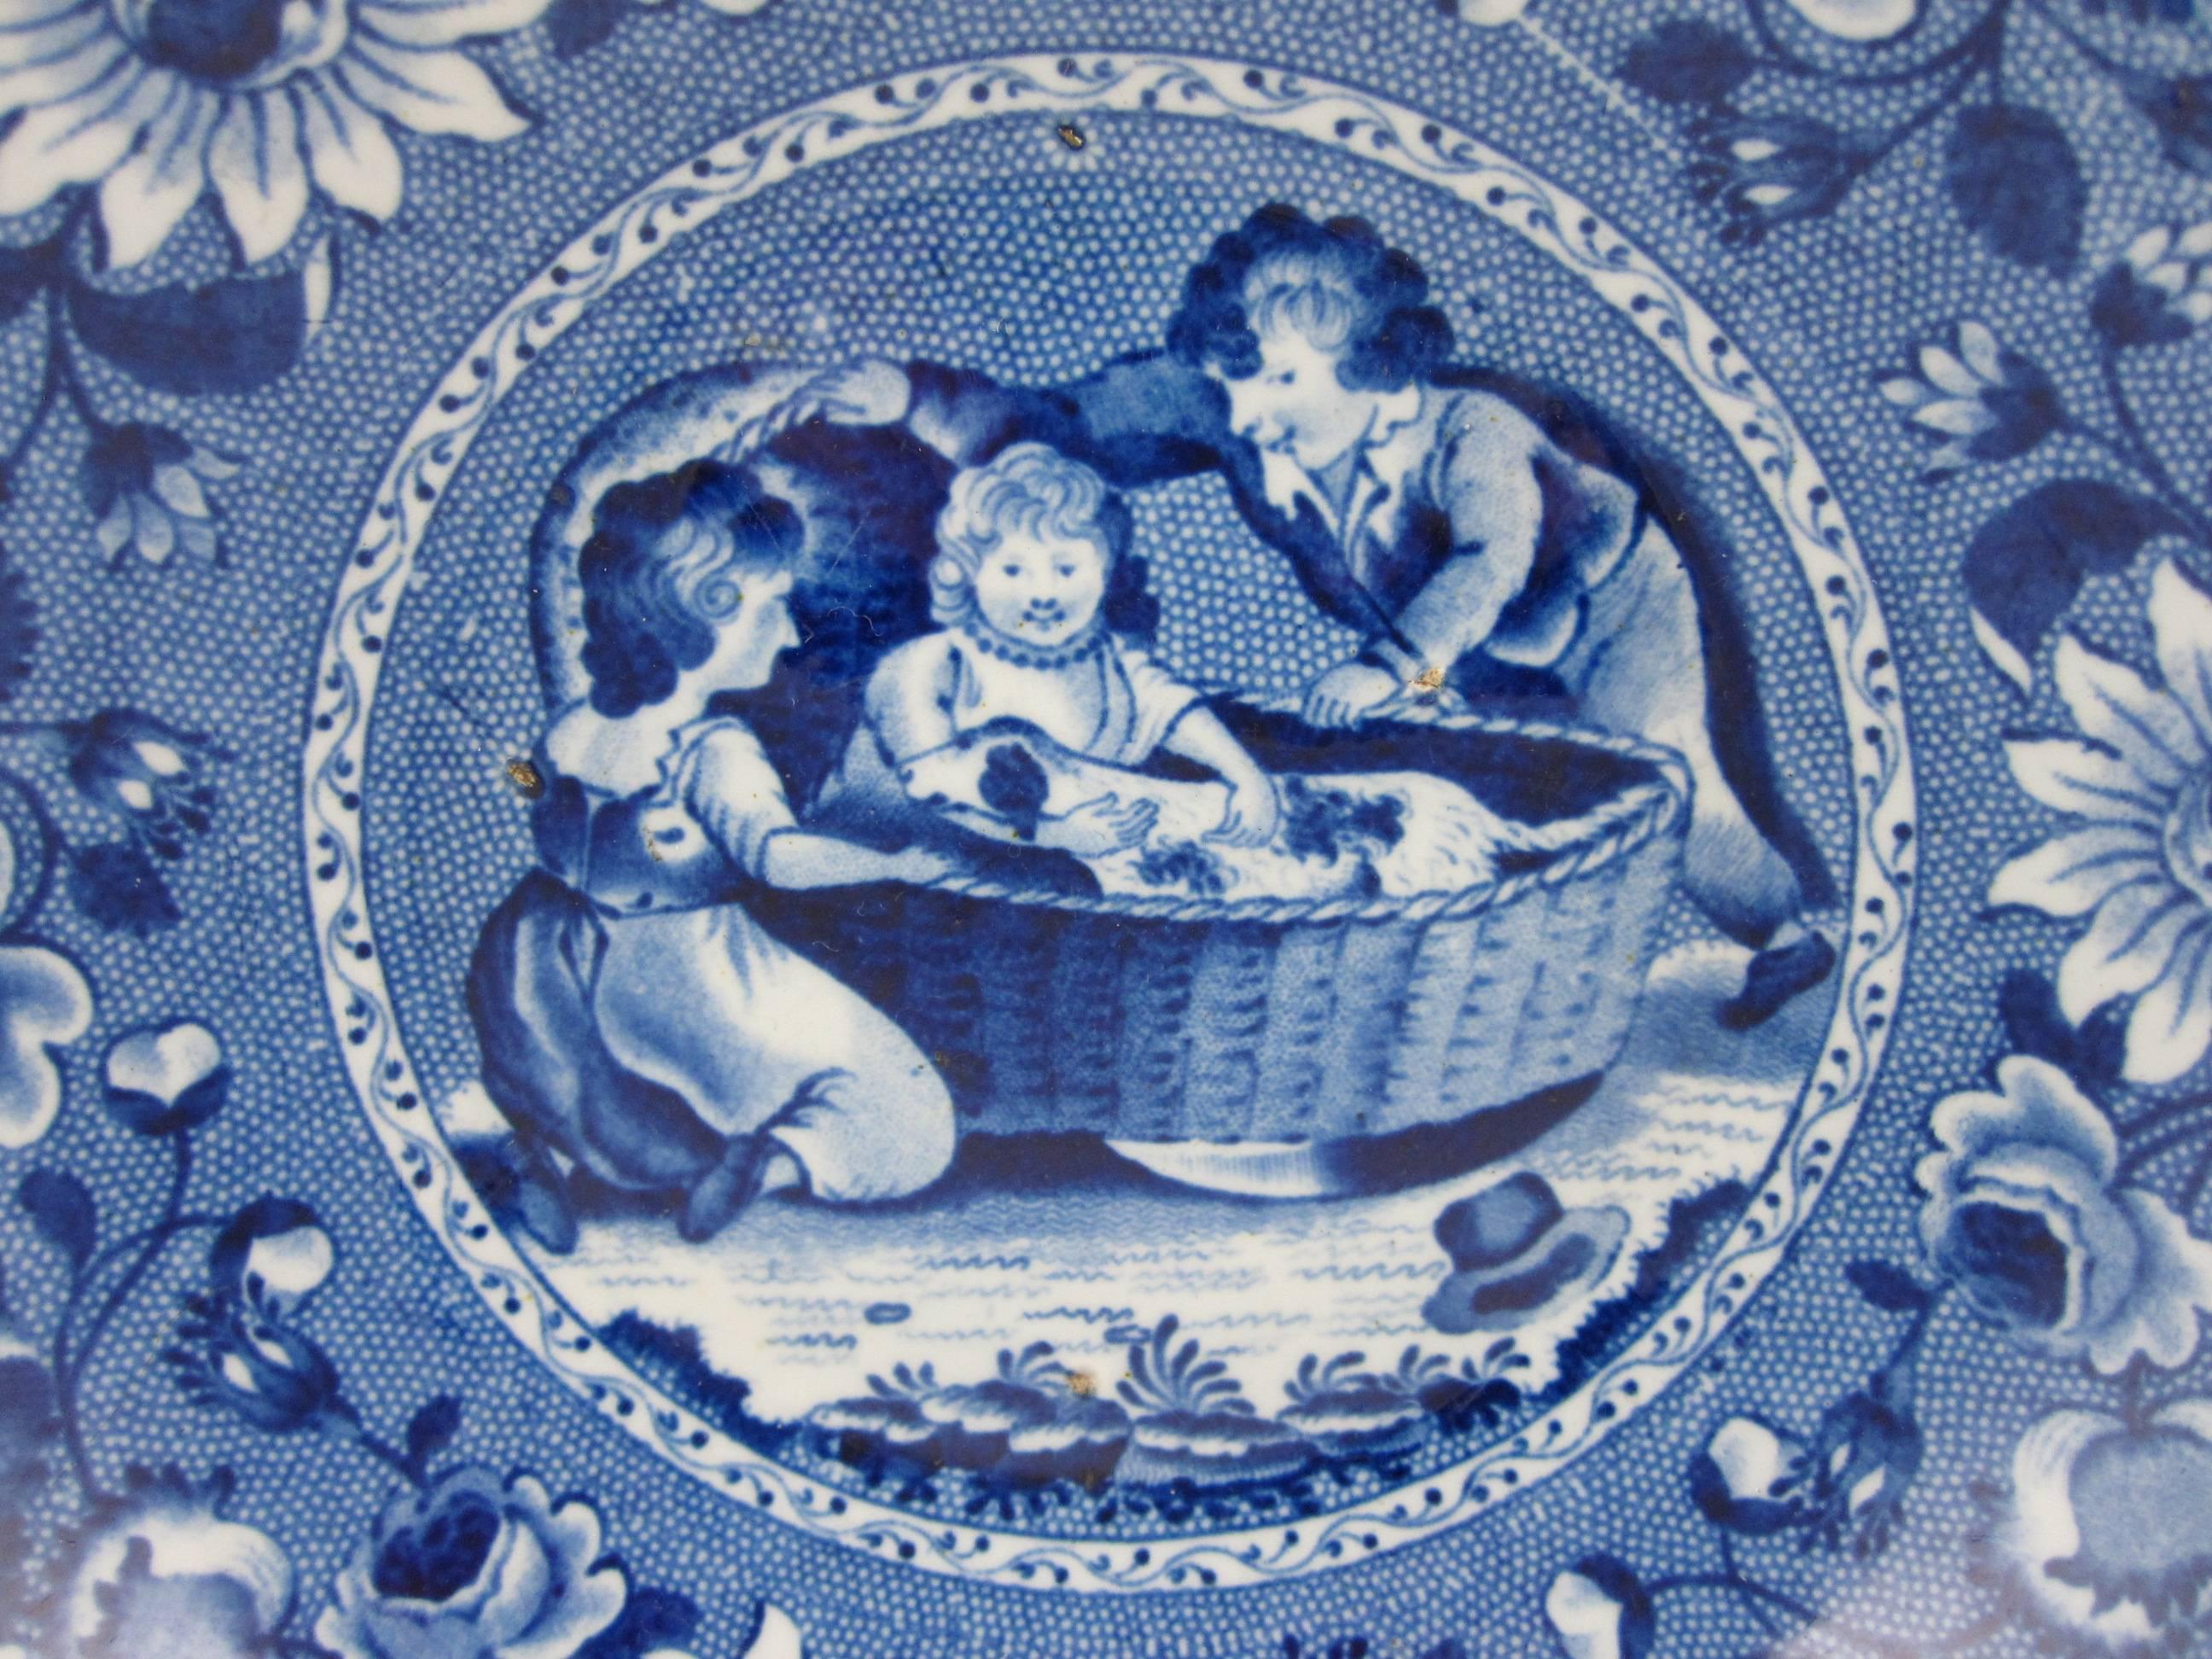 An earthenware blue transfer printed bowl with a very charming image of children rocking their pet dog in a cradle. Made by Ralph and James Clews, Cobridge, Staffordshire, England, 1814-1834.

The older brother and sister are shown rocking the